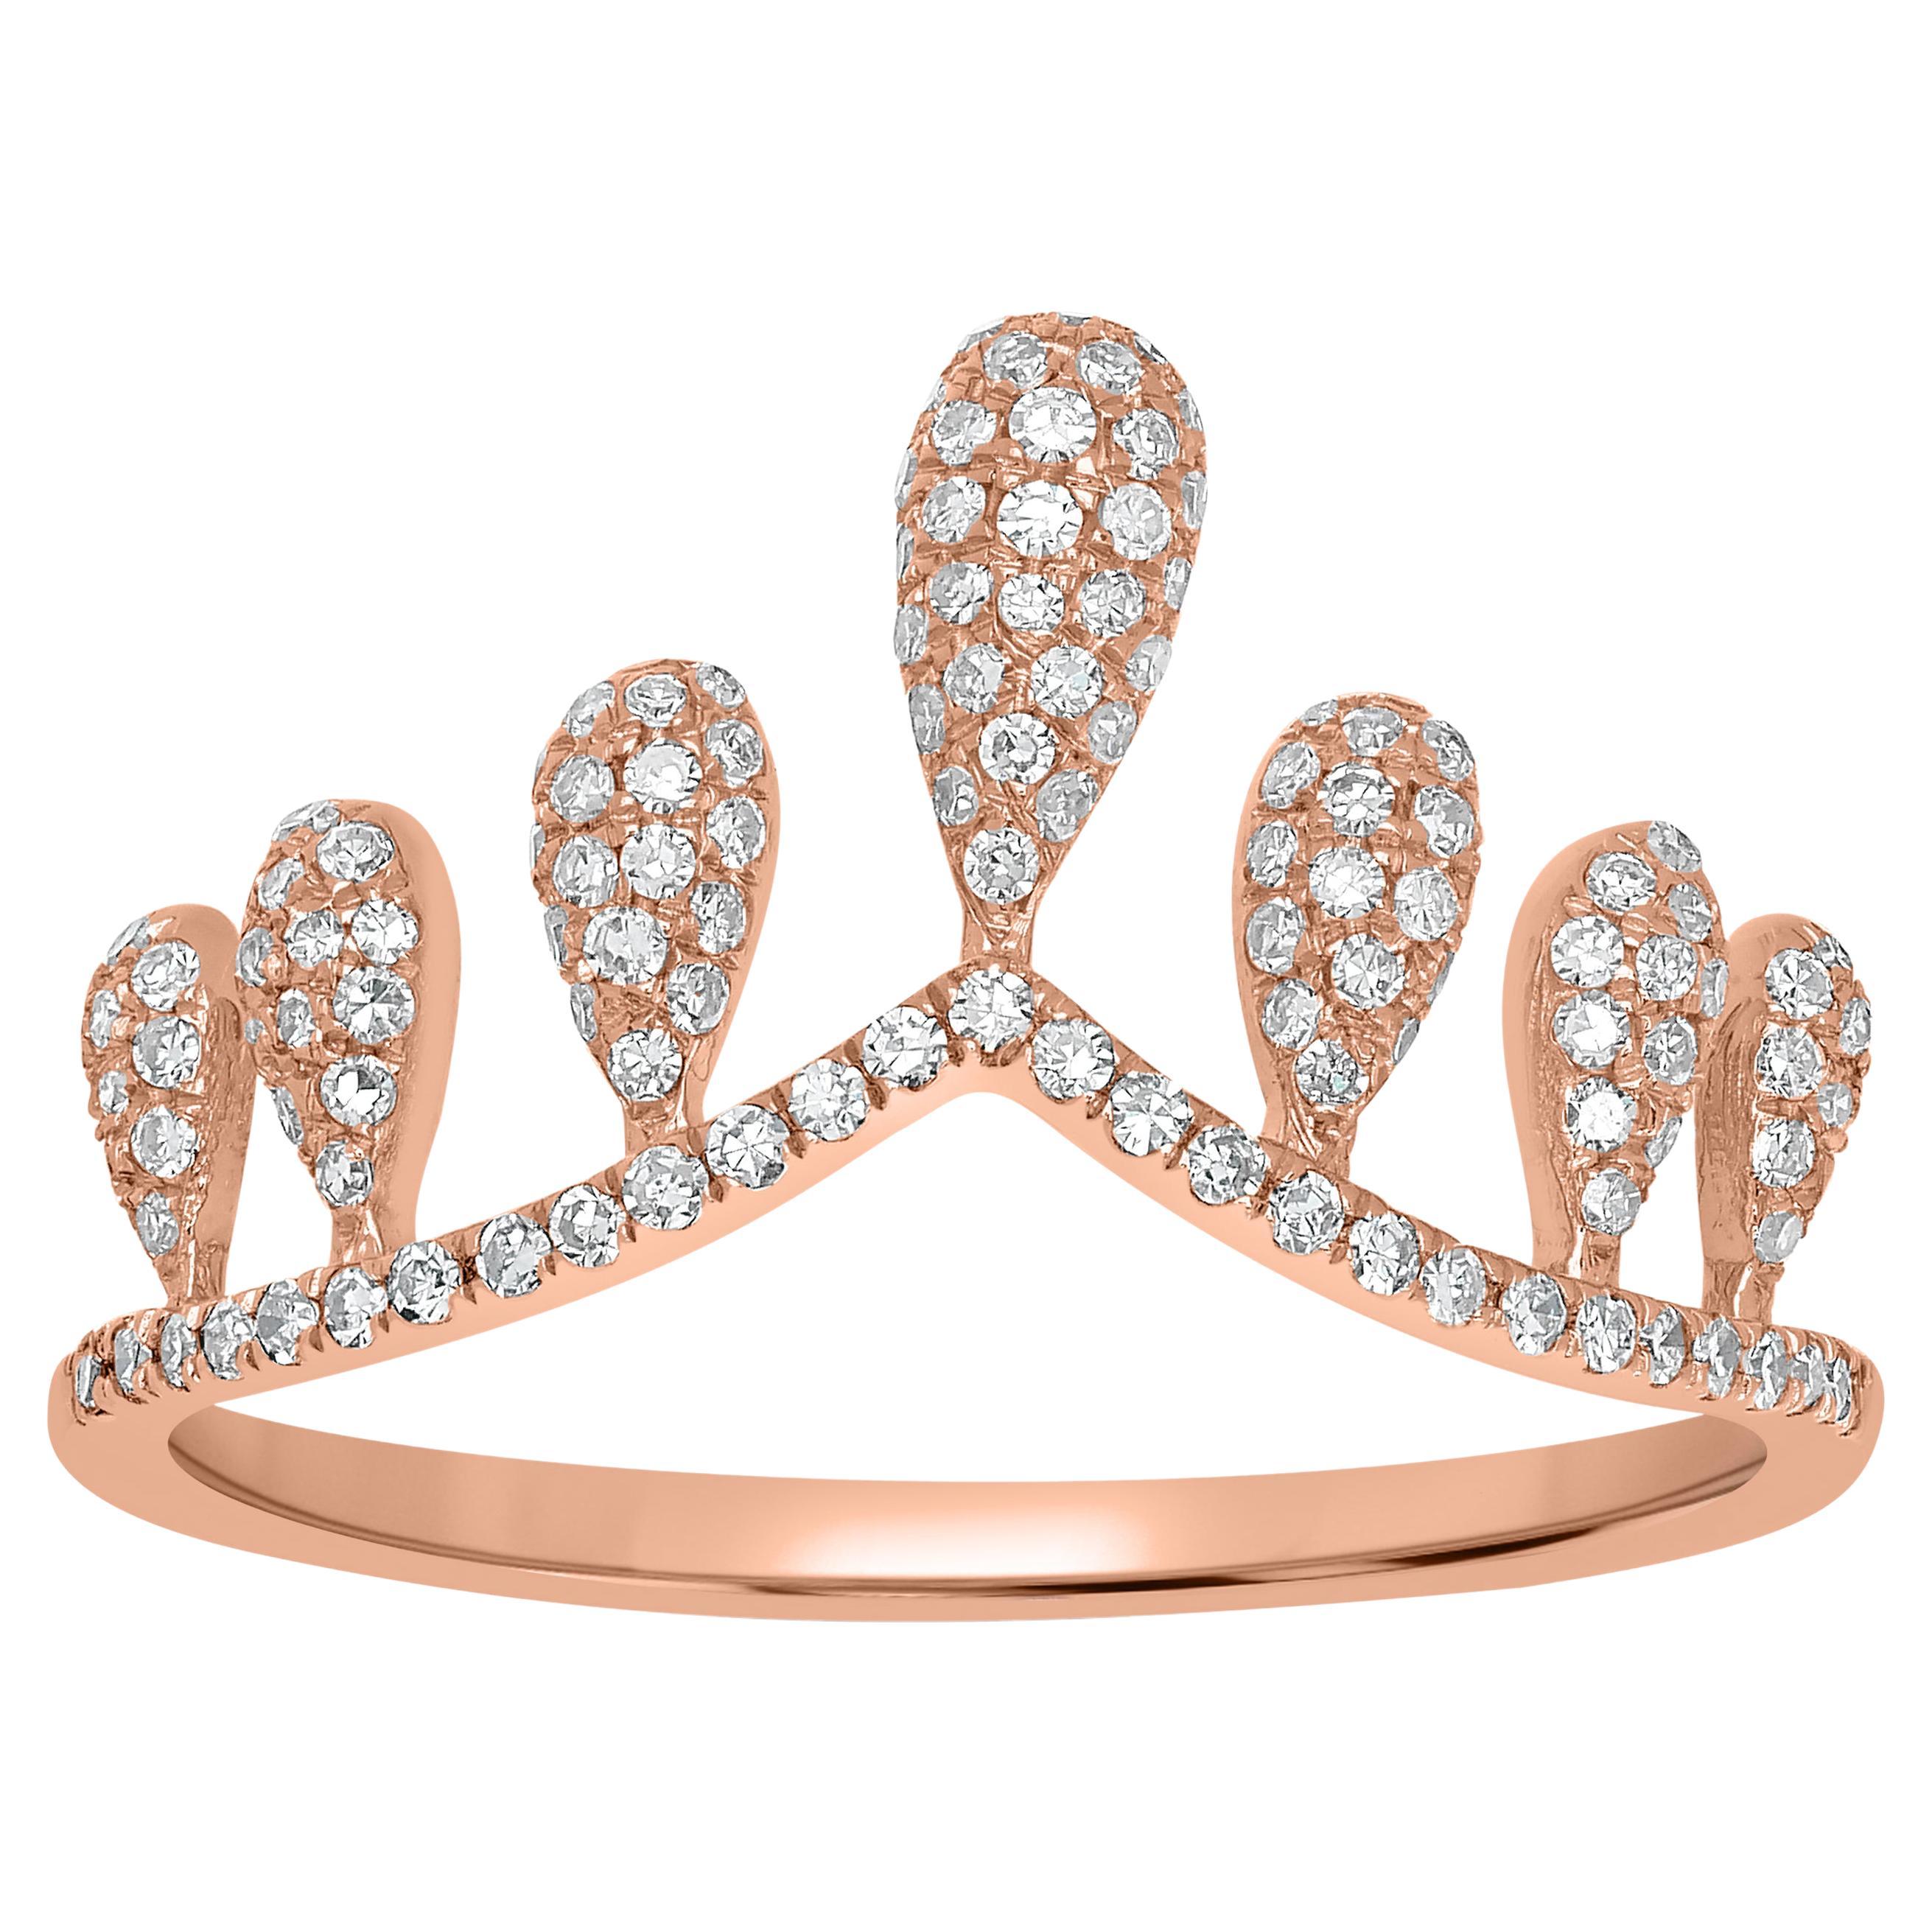 Luxle 0.40 Carats Pave Diamond Crown Ring in 14k Rose Gold For Sale